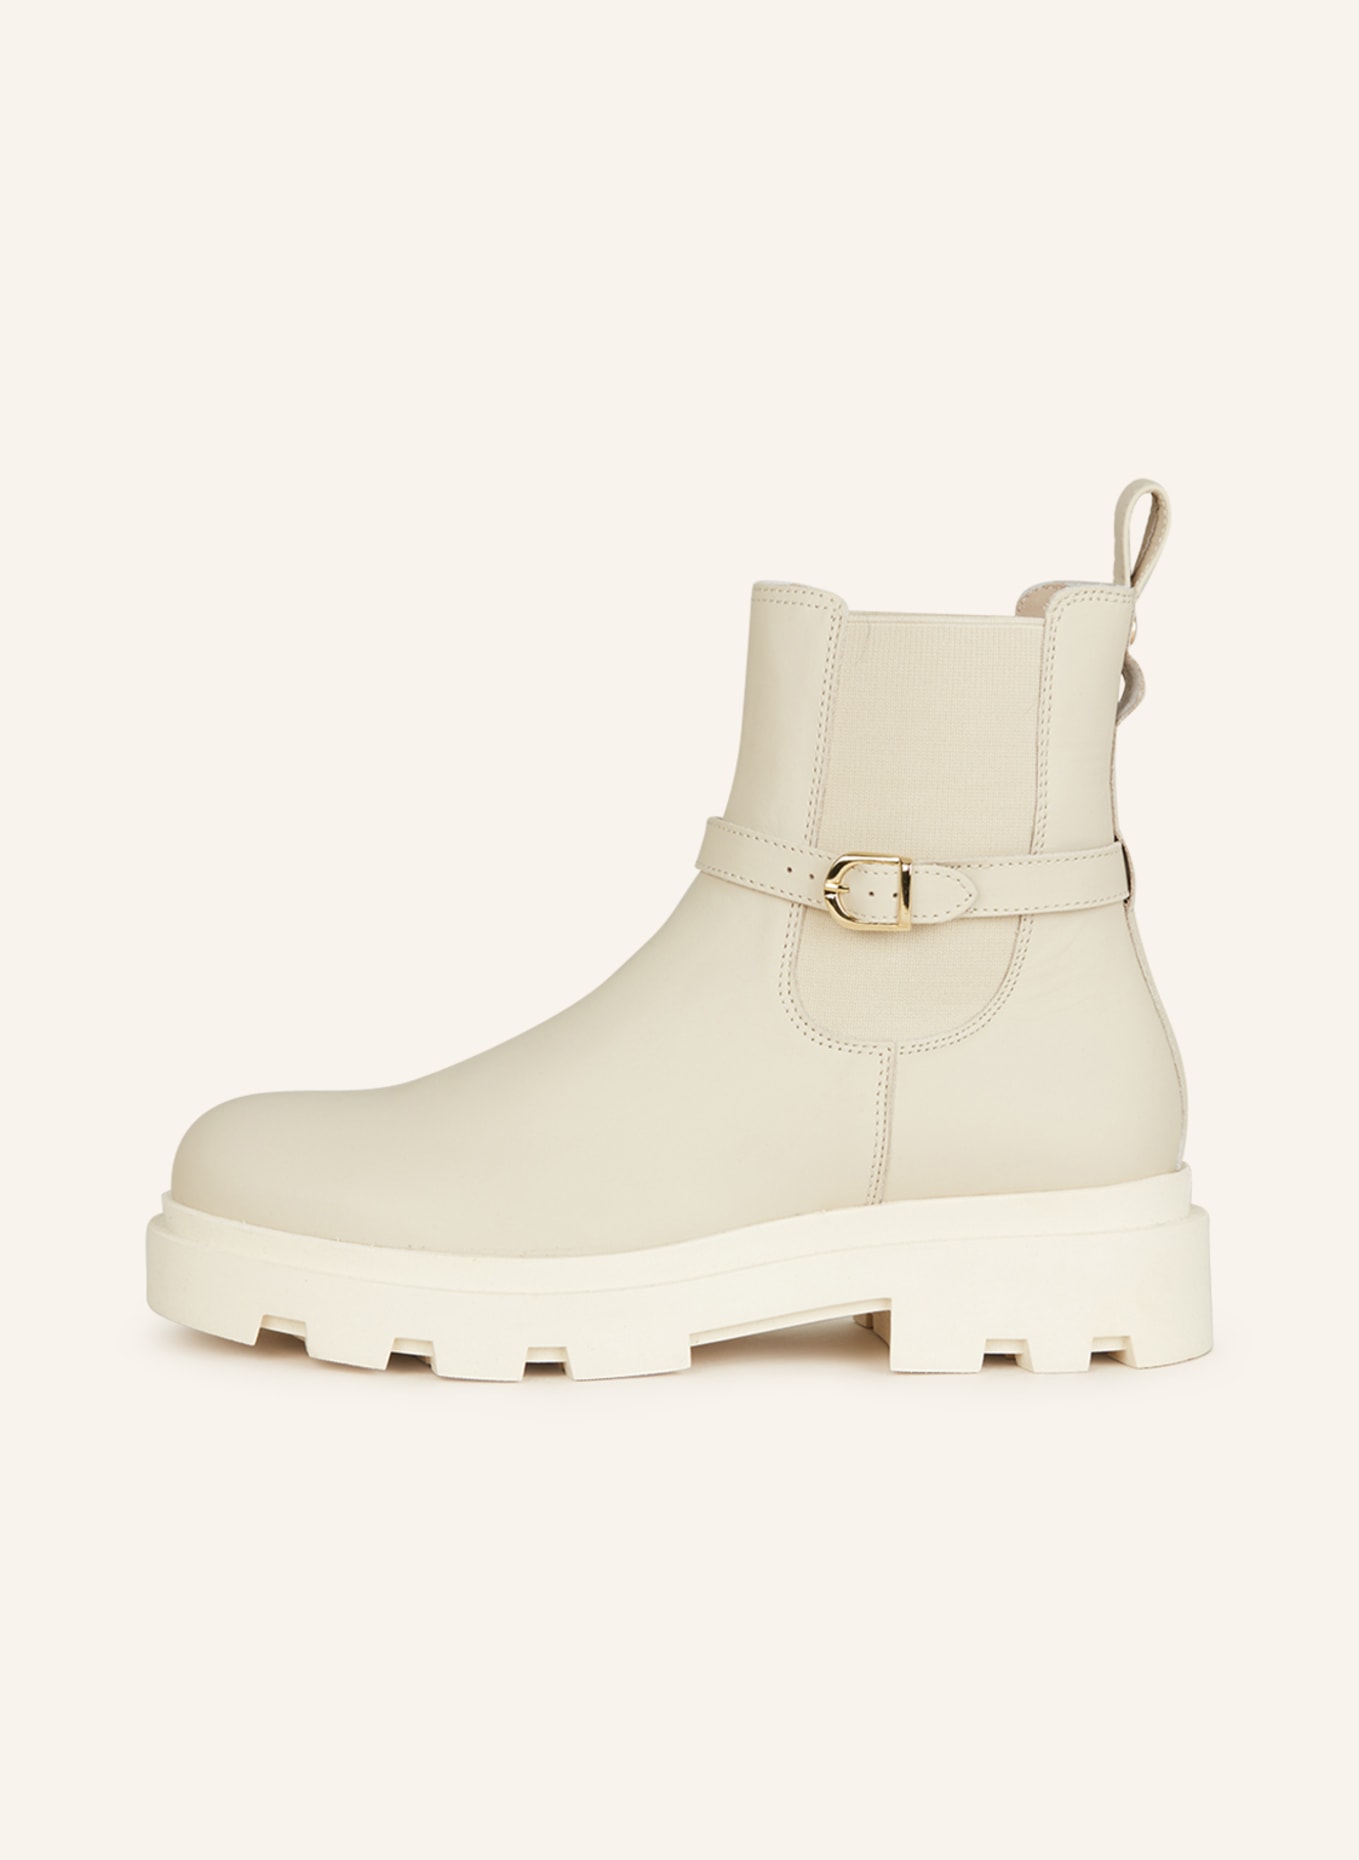 HEY MARLY Chelsea-Boots CLASSY AESTHETIC, Farbe: CREME (Bild 4)